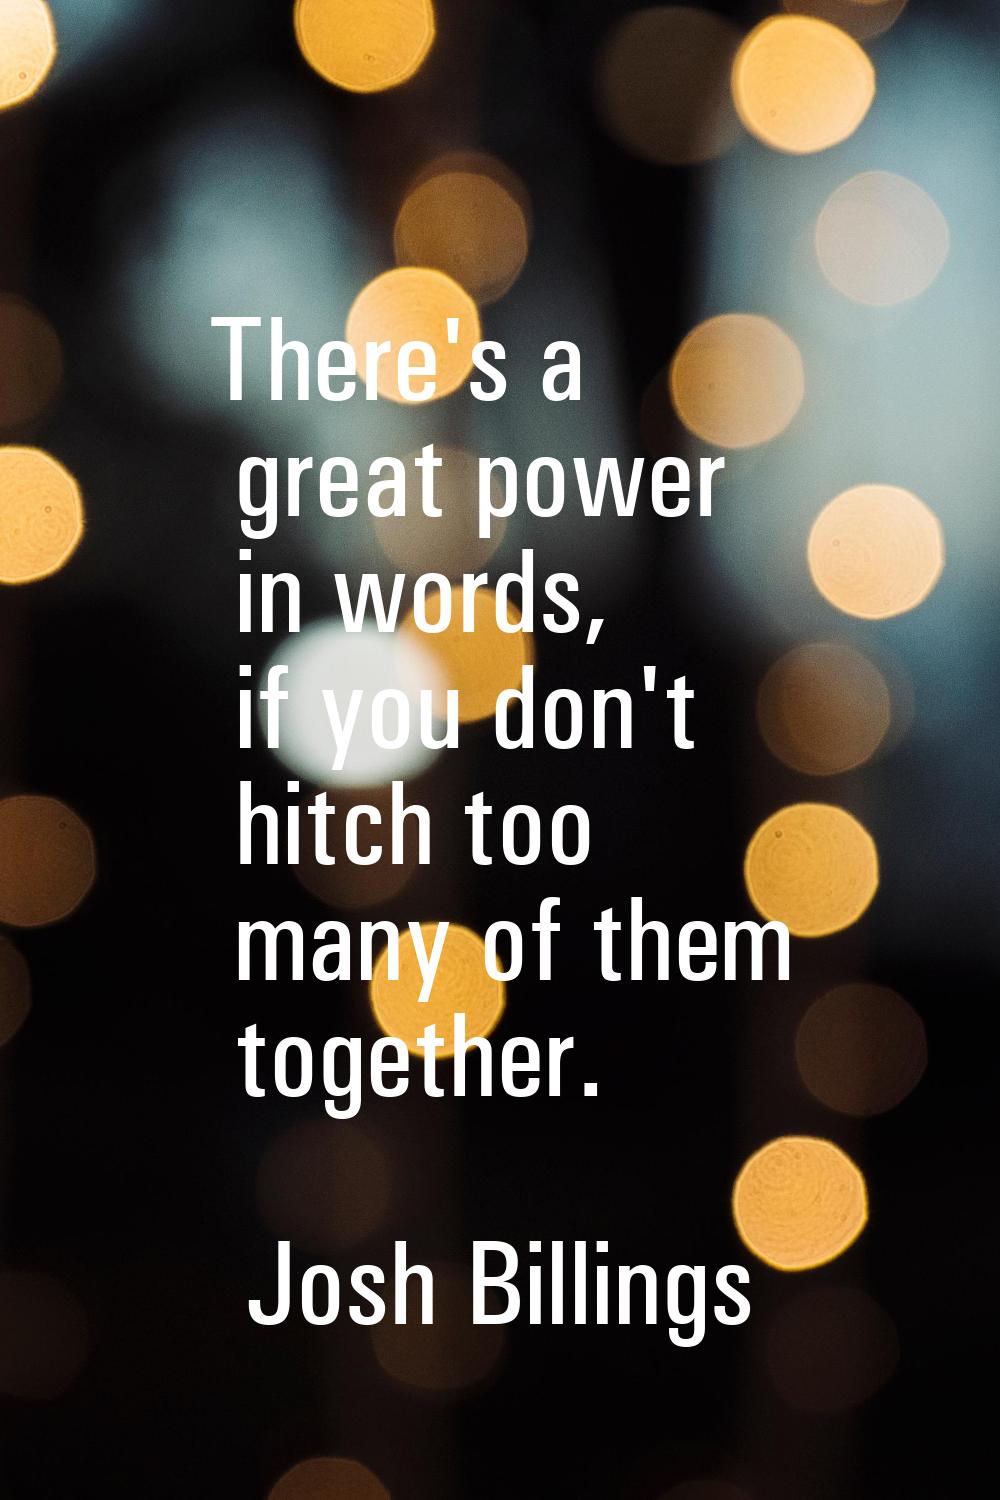 There's a great power in words, if you don't hitch too many of them together.